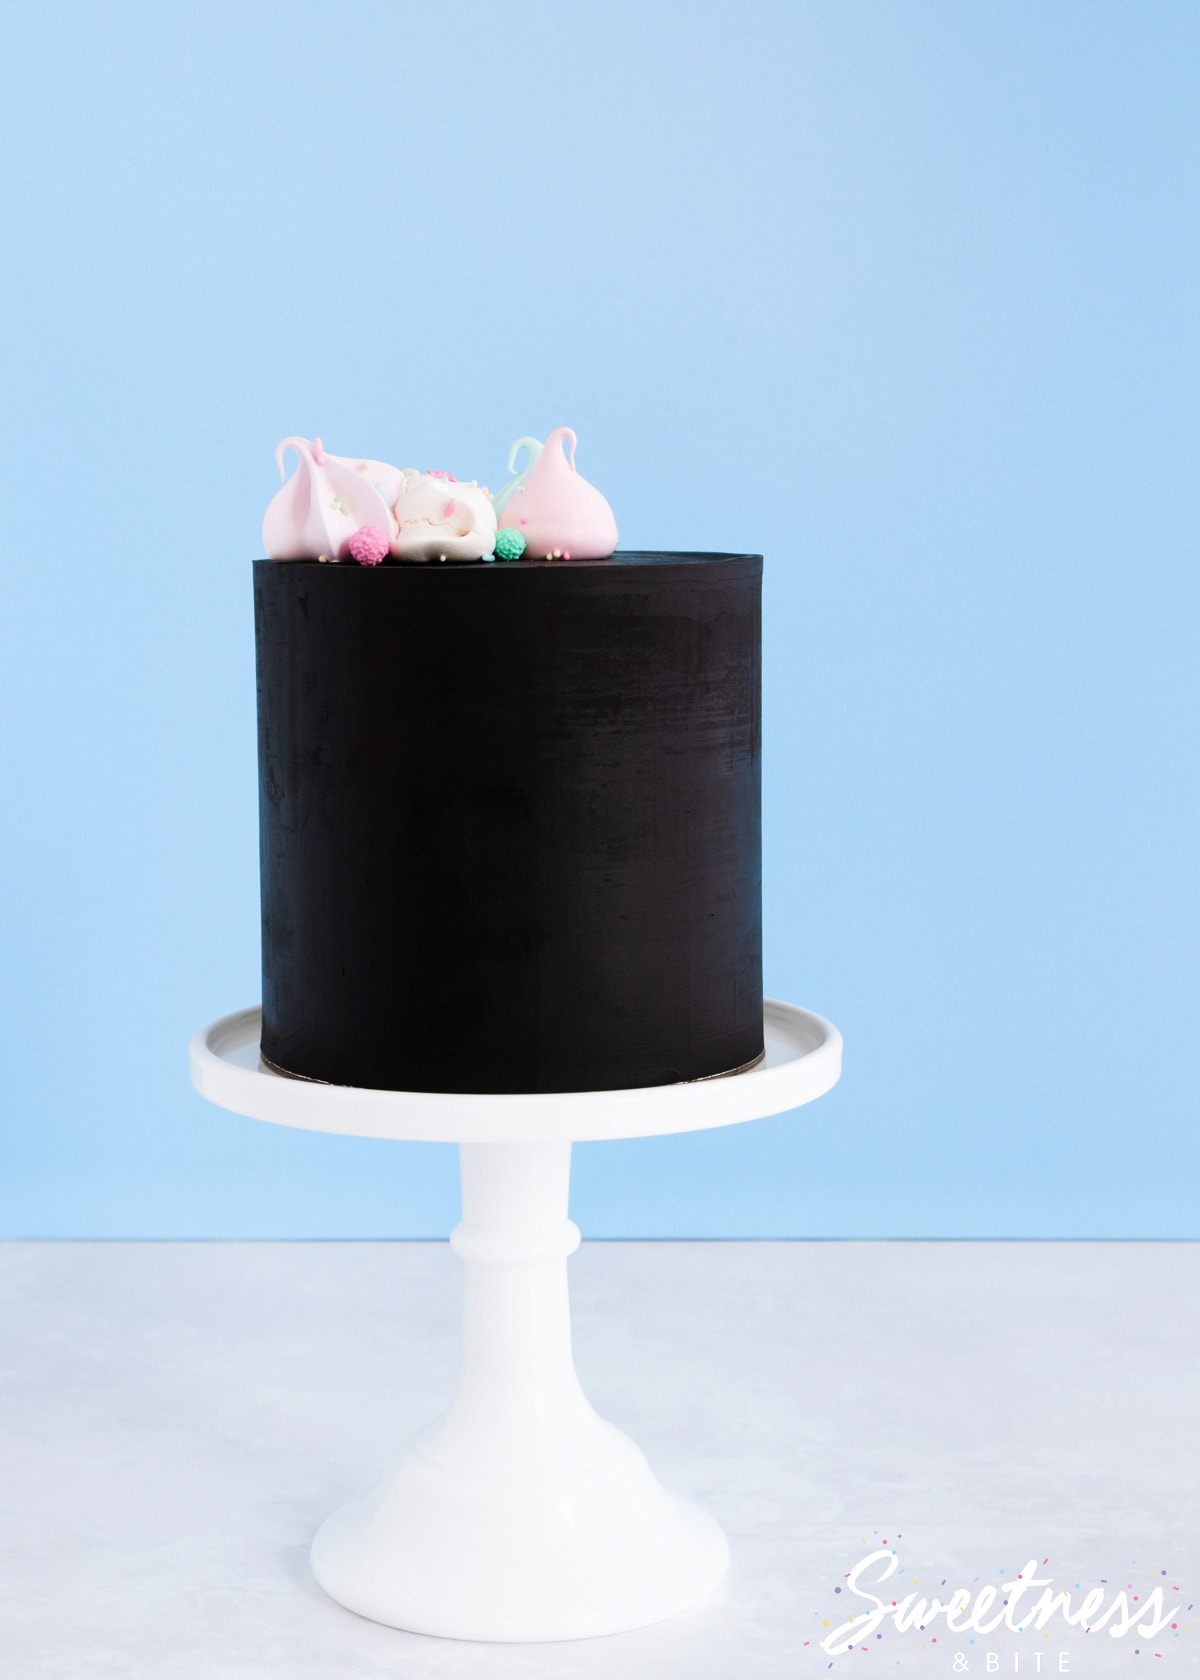 A cake covered in black chocolate ganache, on a white cake stand, topped with pastel meringues.